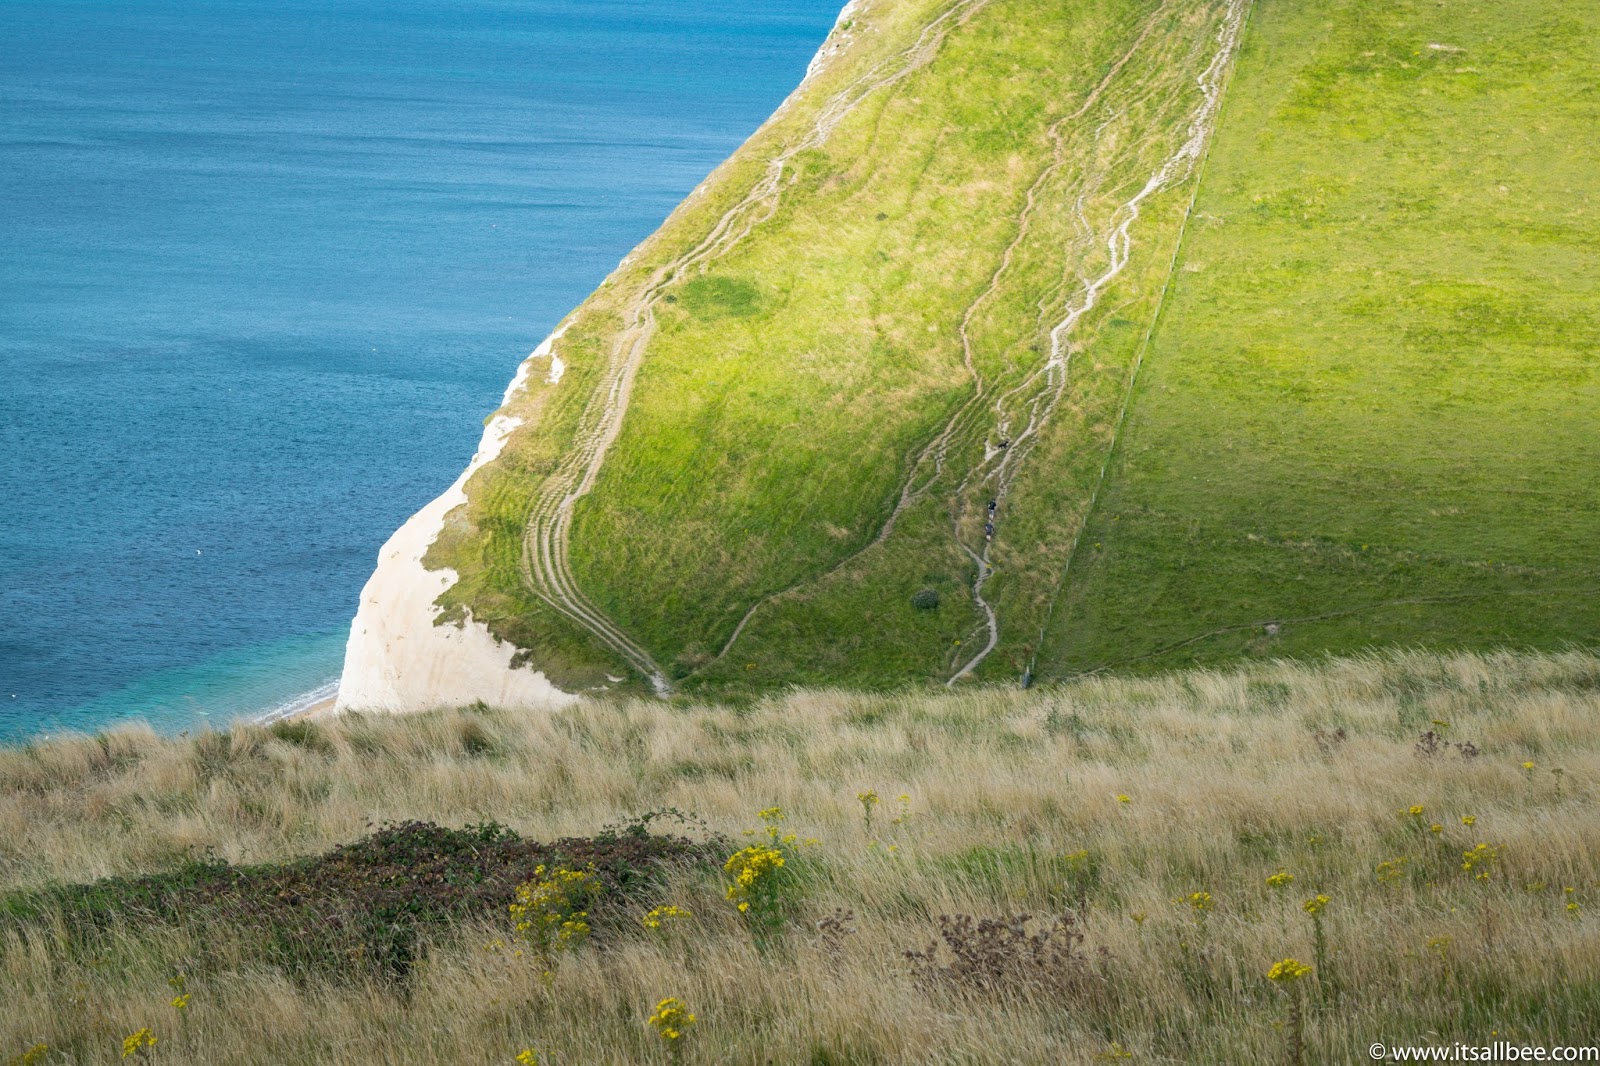  Durdle Door Dorset | 5 Things To Do In England's Jurassic Coast | Durdle From London